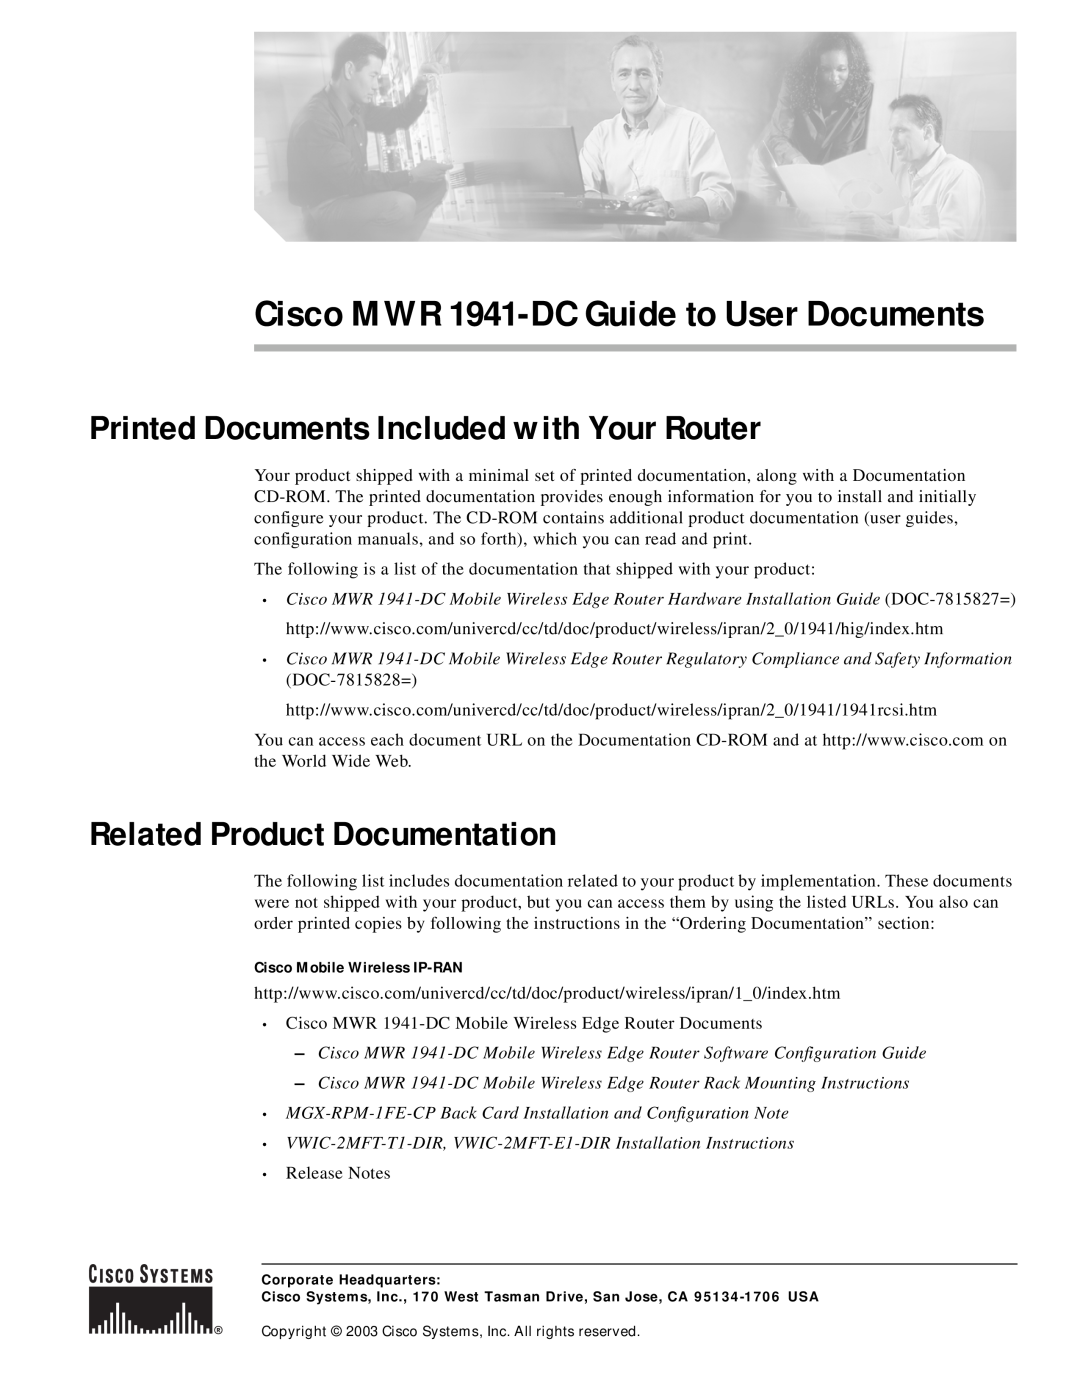 Cisco Systems 1941-DC configurationmanual Printed Documents Included with Your Router, Related Product Documentation 